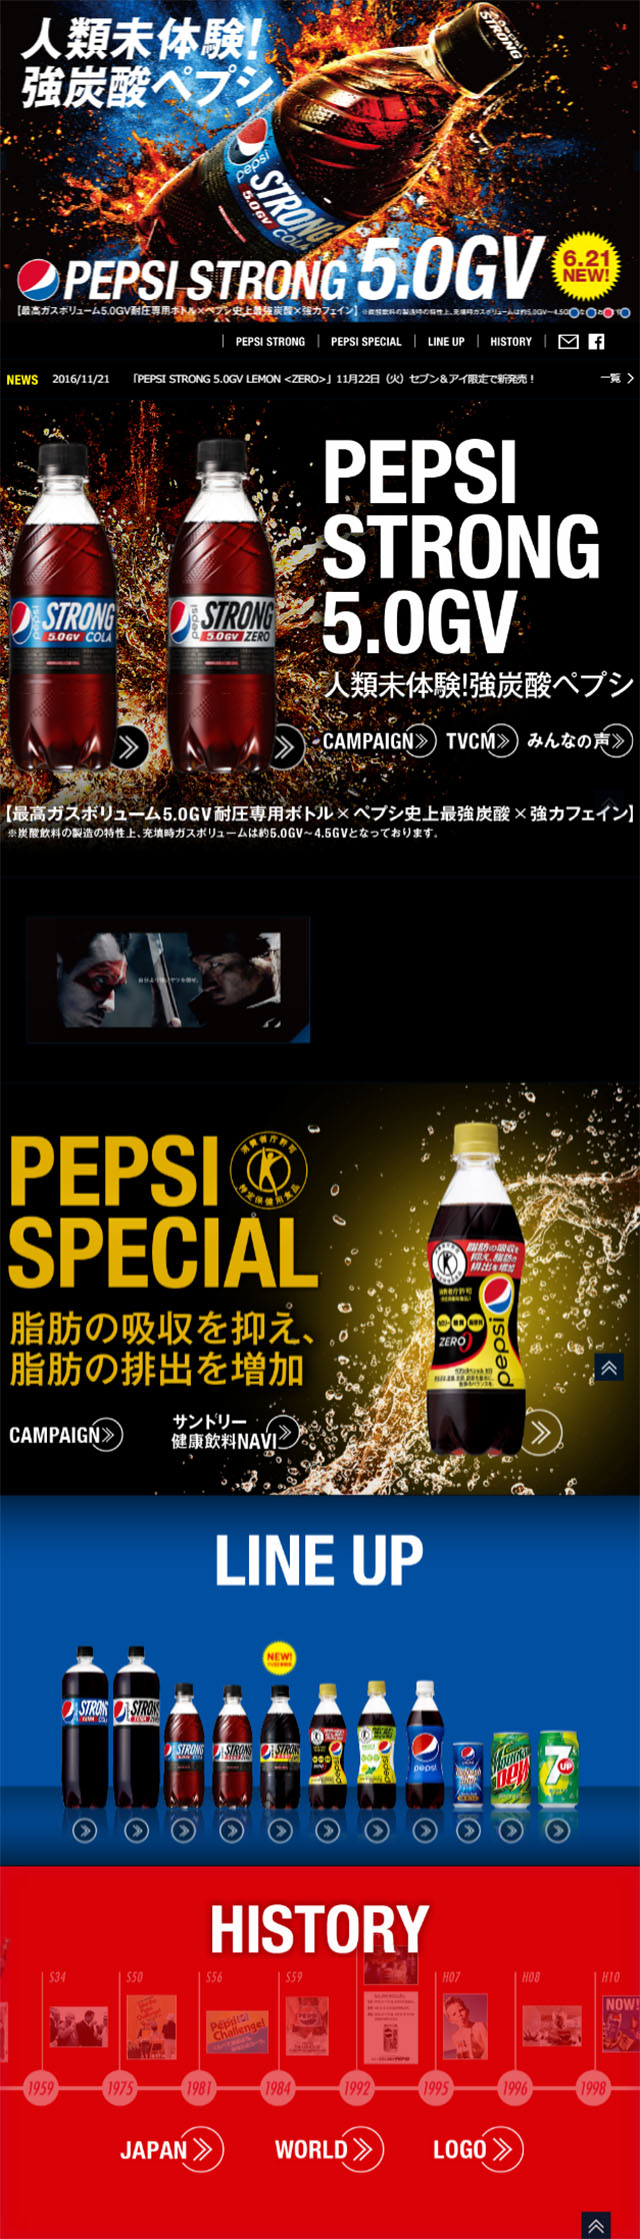 pepsi STRONG_sp_1